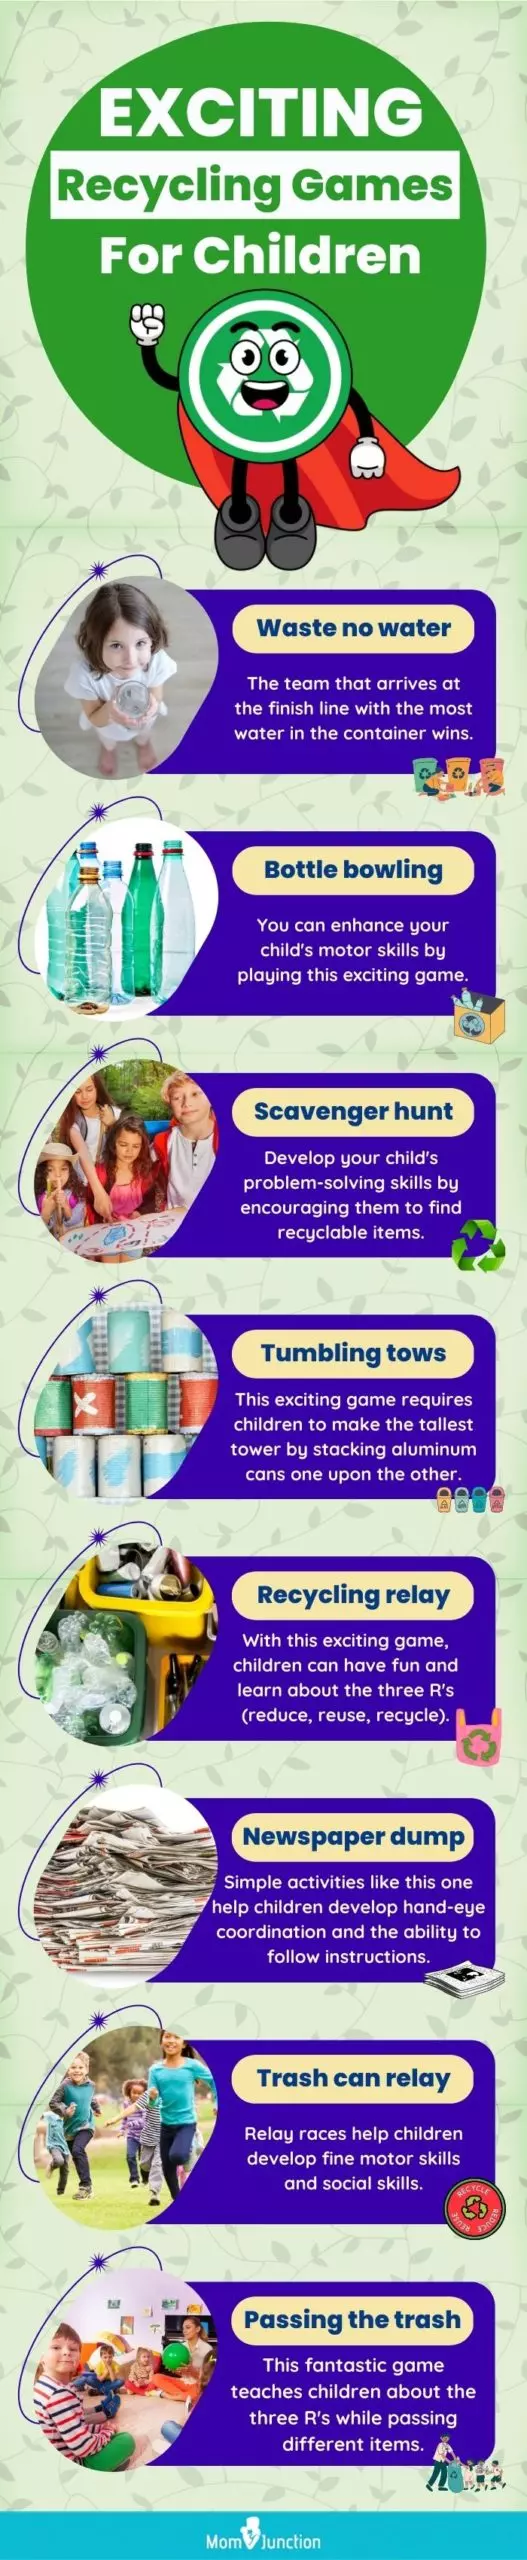 exciting recycling games for children (infographic)